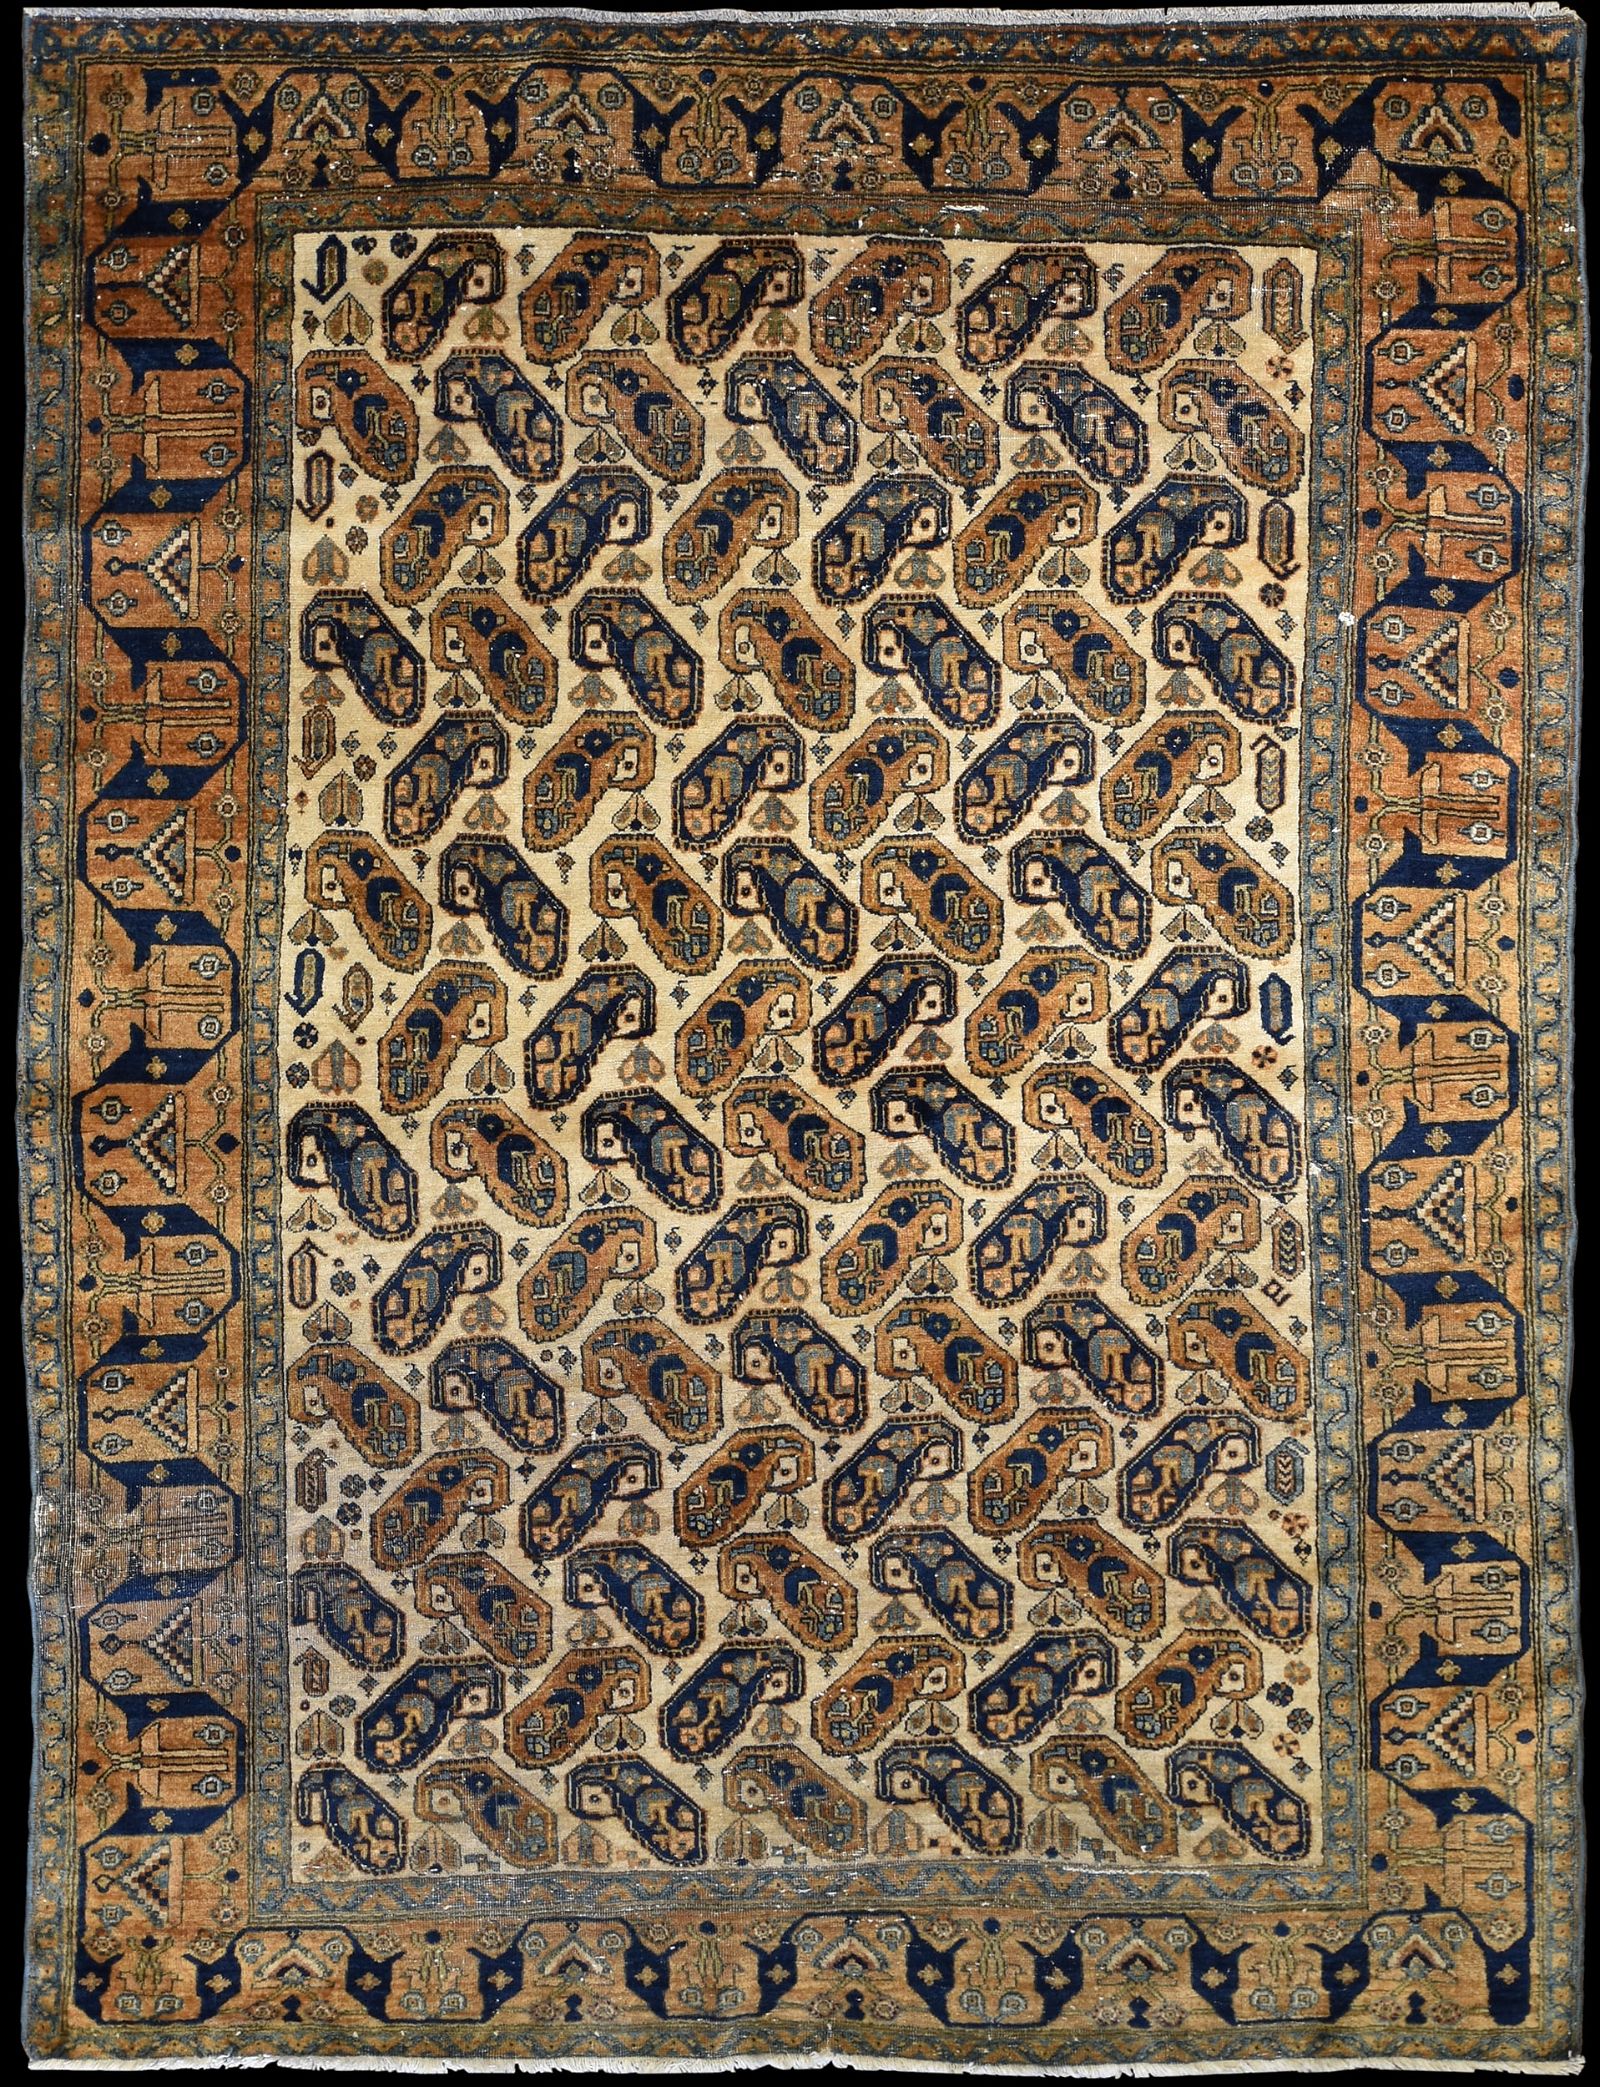 AN AFSHAR RUG, SOUTH WEST PERSIAAn